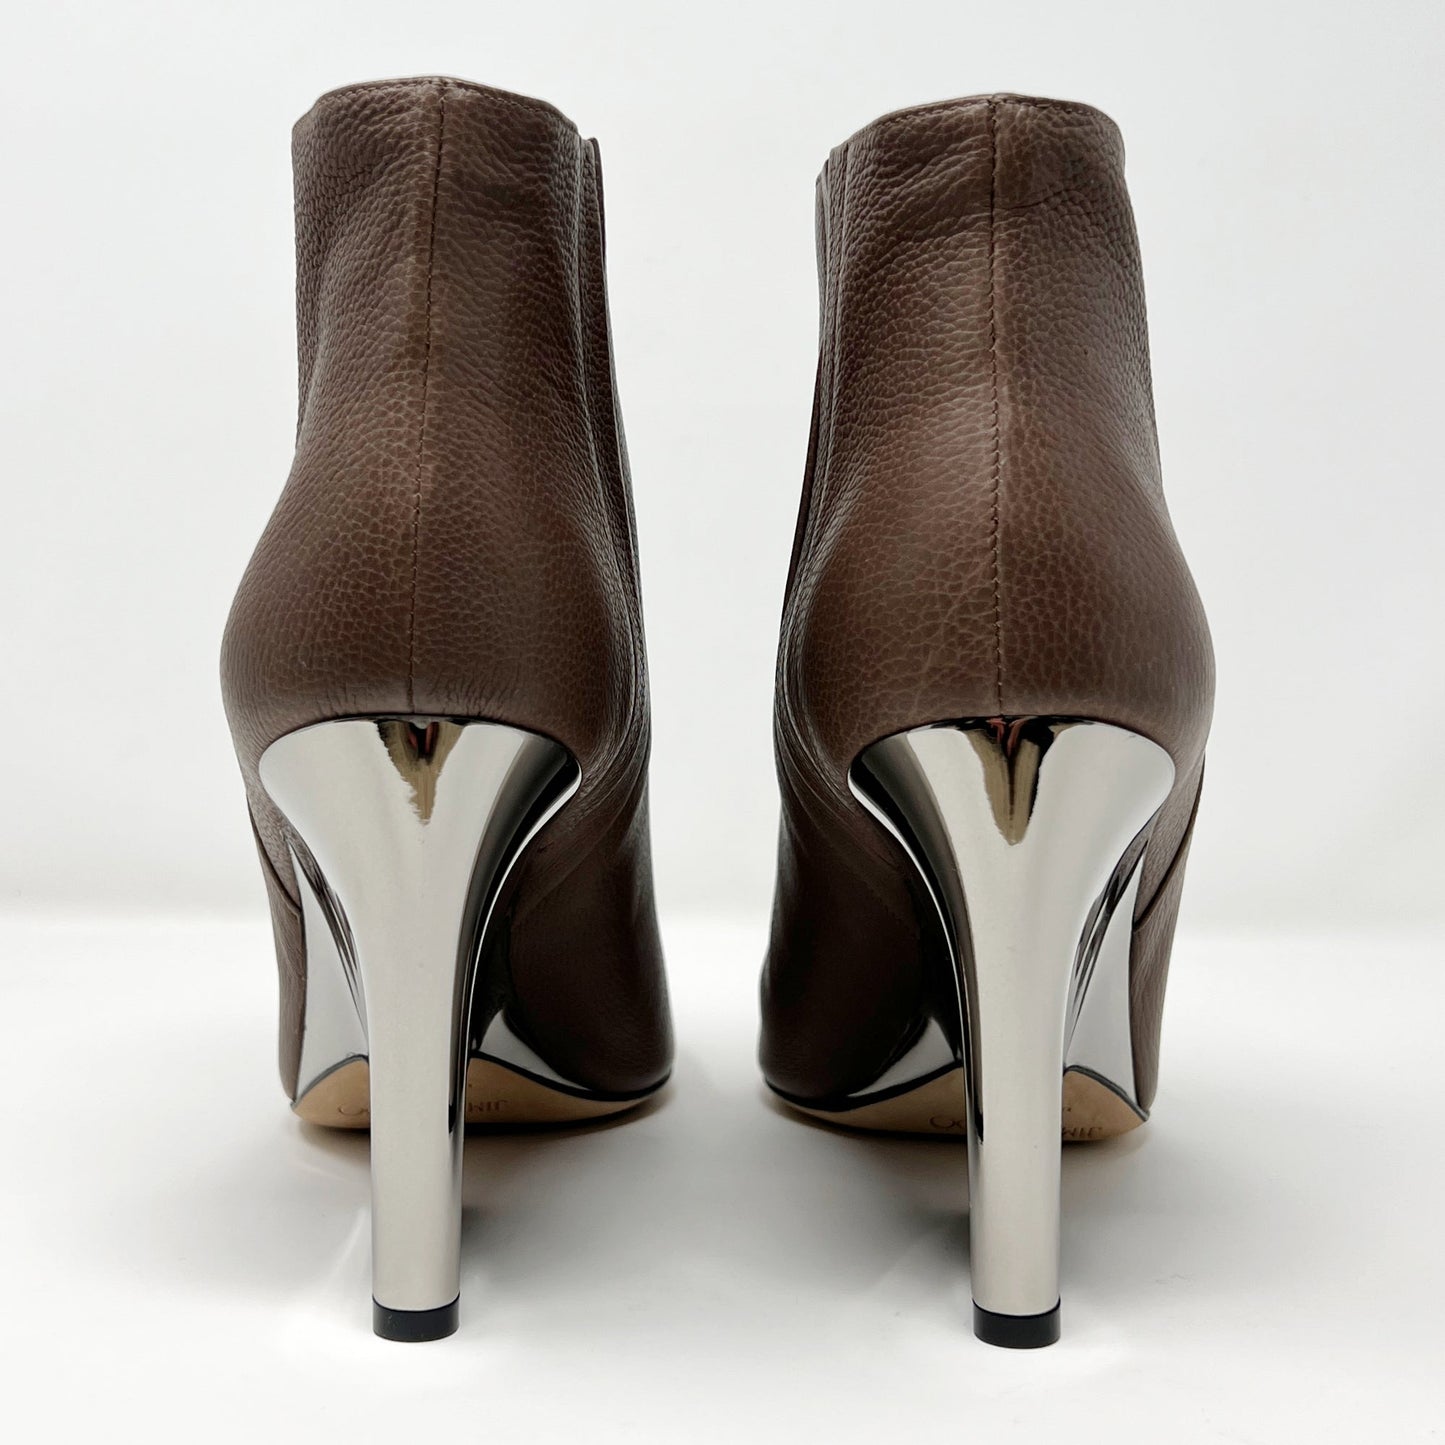 Jimmy Choo Myth Brown Grained Leather Mirrored Wedge Heel Ankle Boots